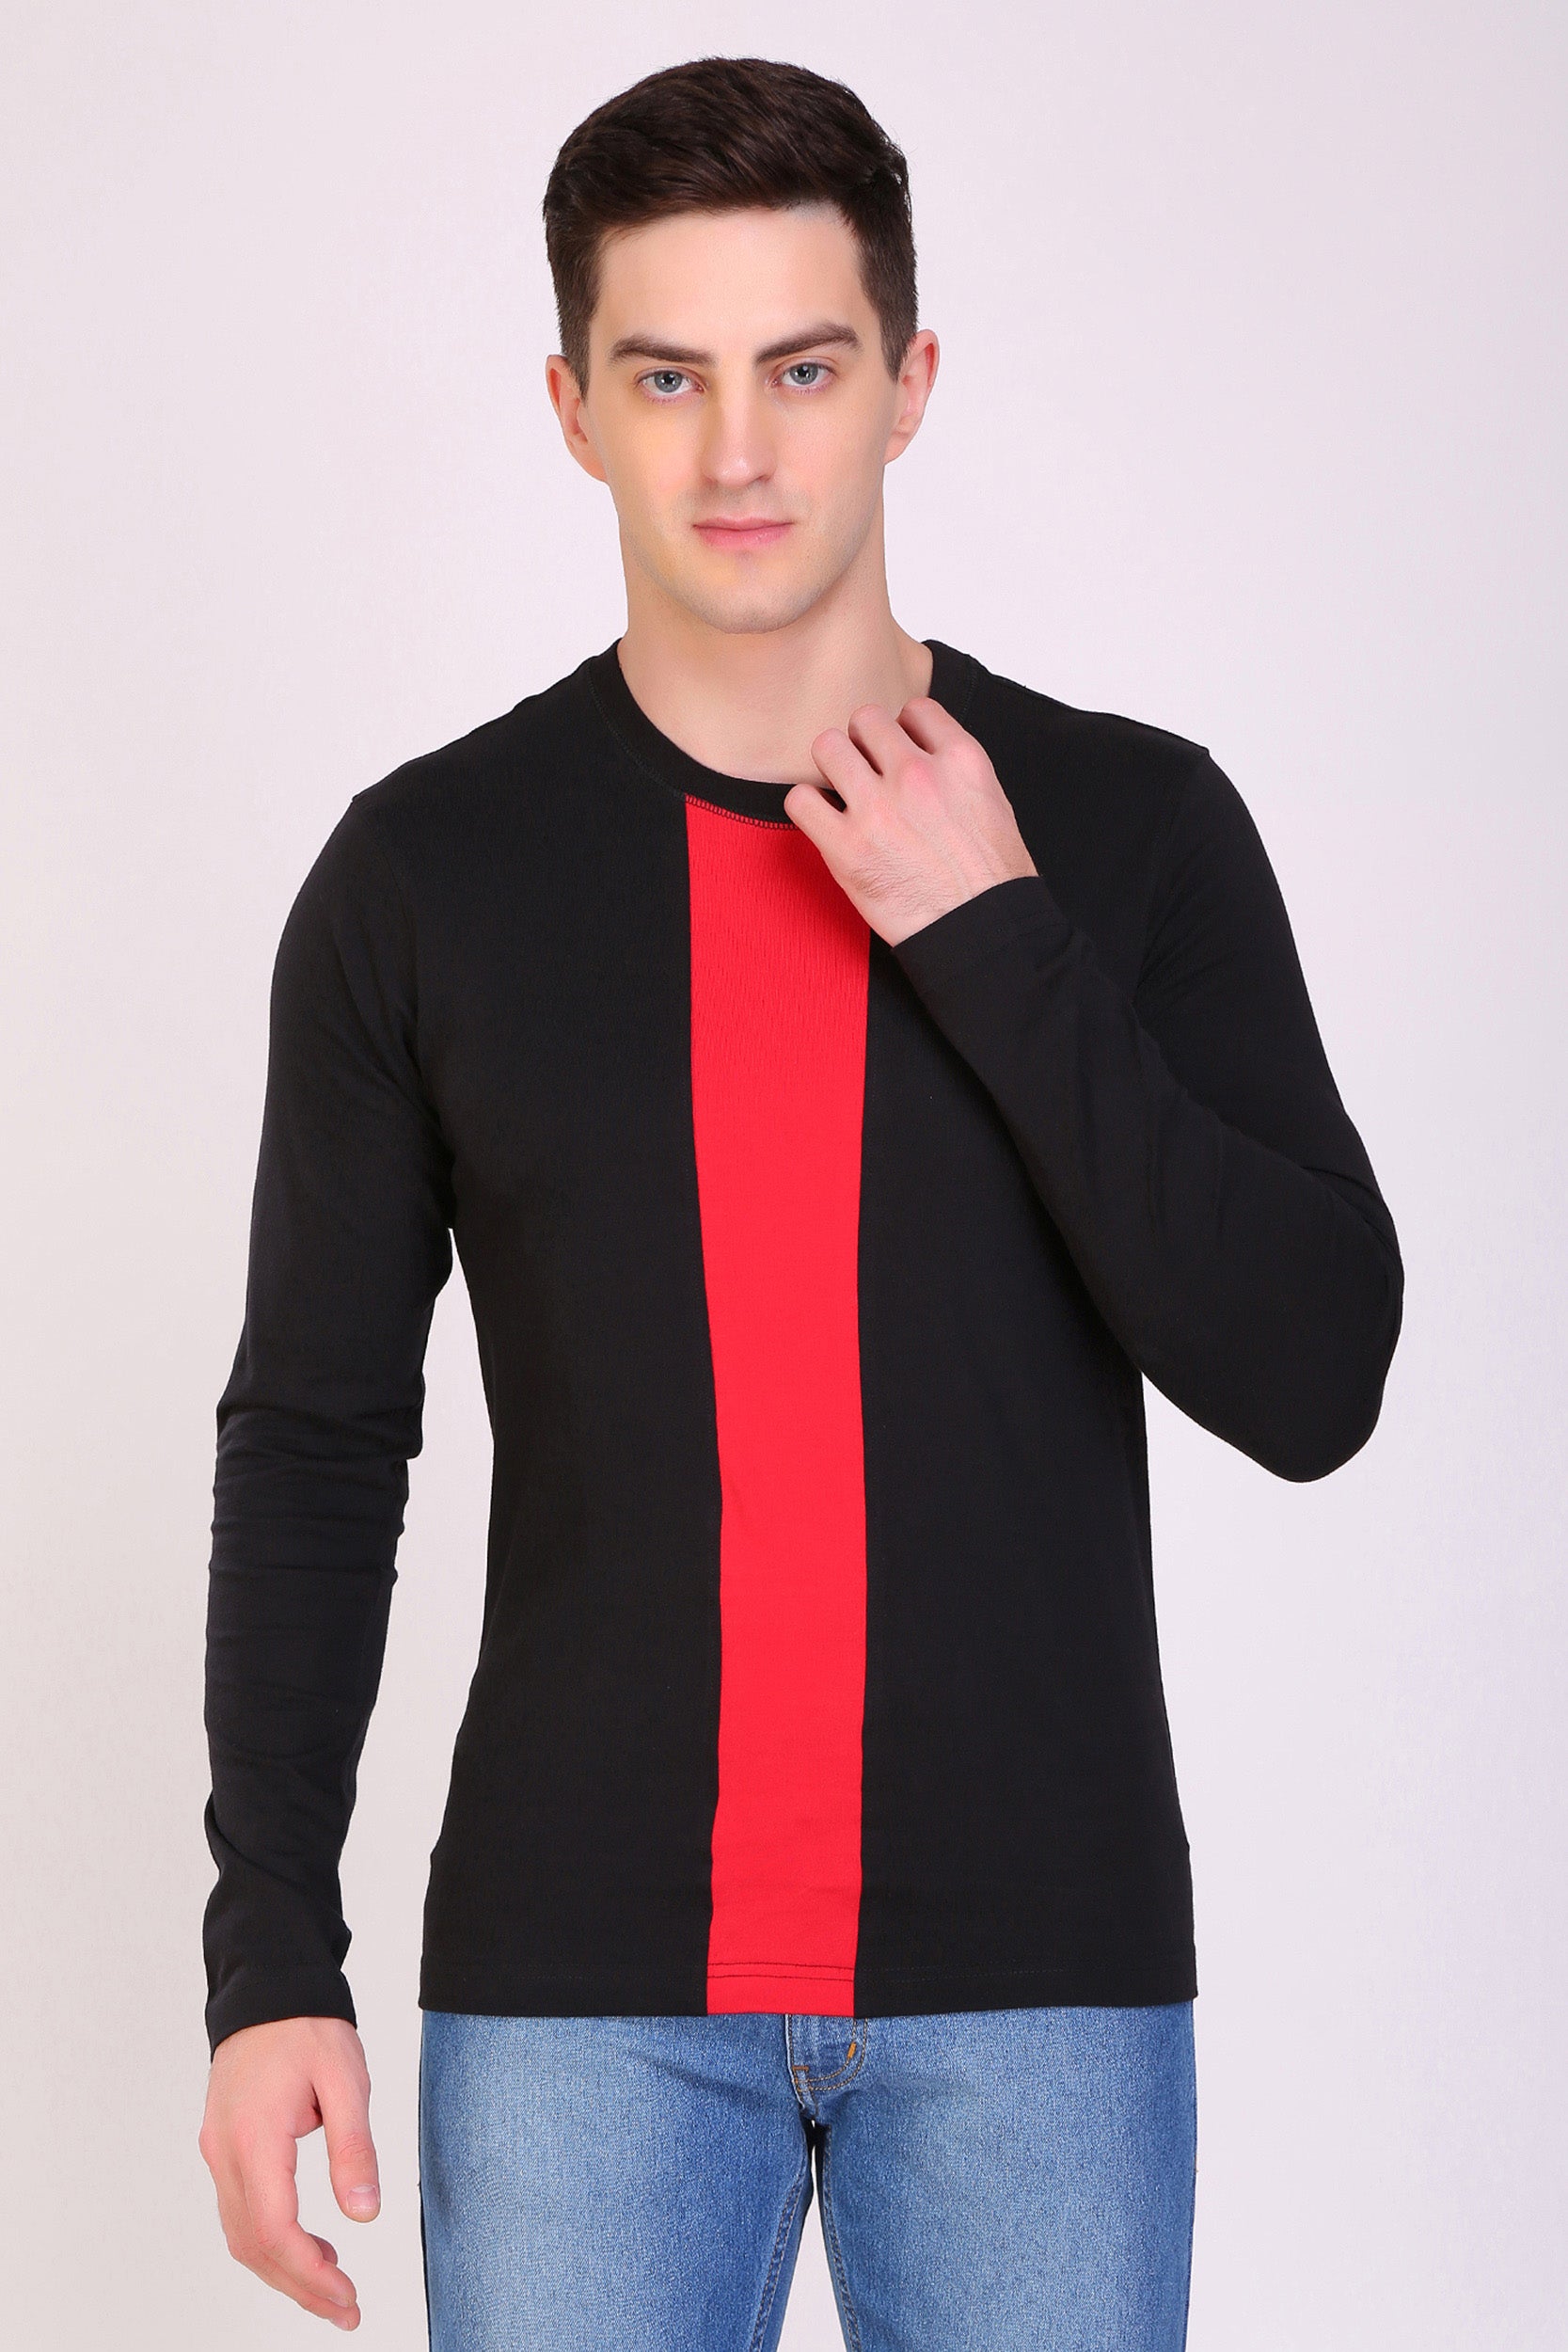 Long Sleeves T-Shirts - Buy Full Sleeves T-shirt Online & get upto 70% off  | Myntra